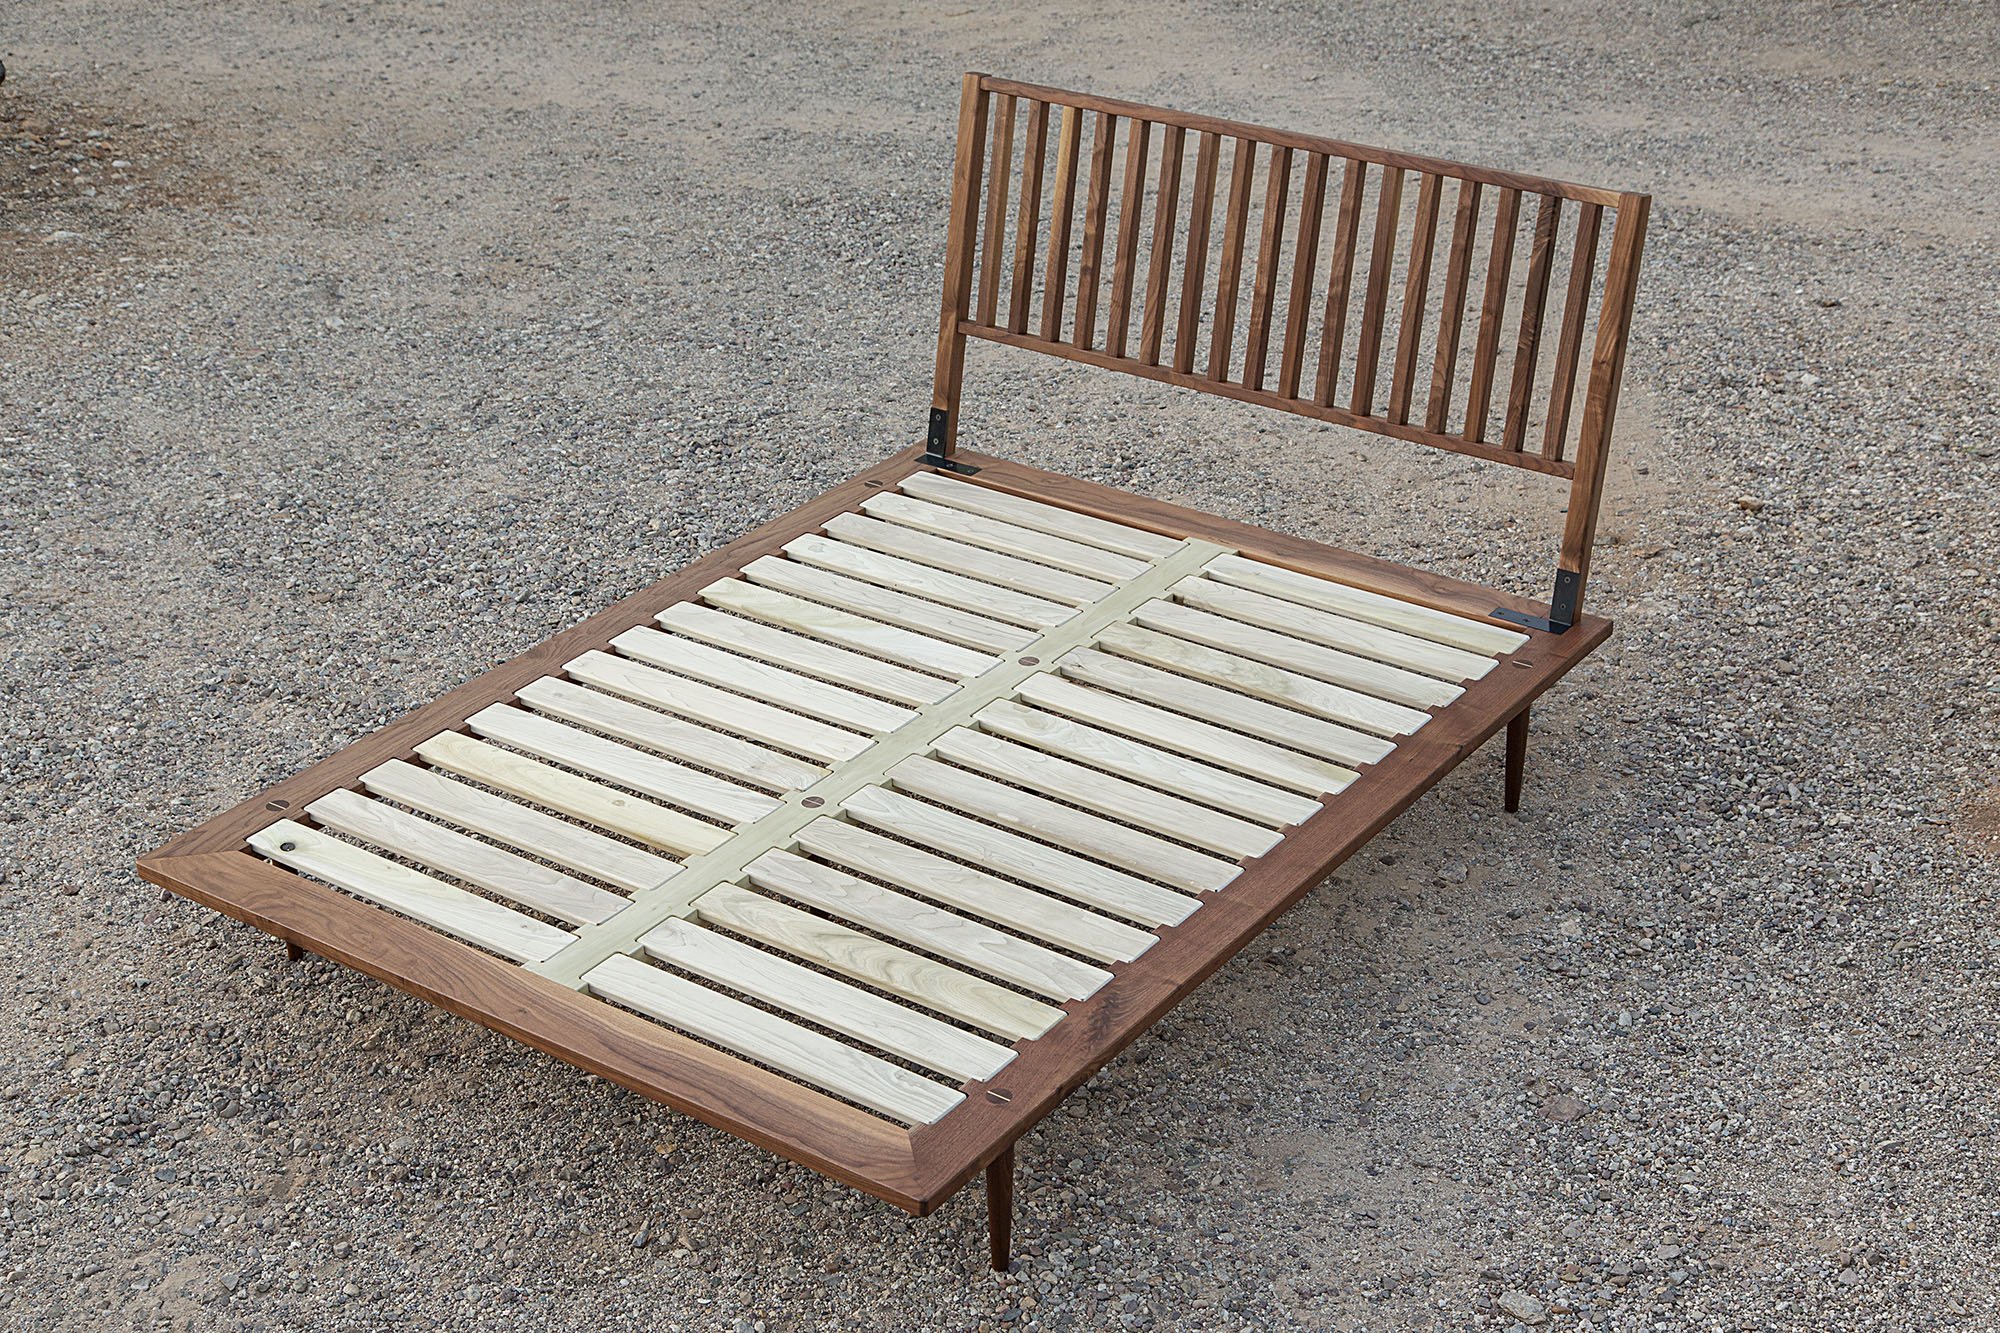 PARK AVE BED FRAME in american walnut